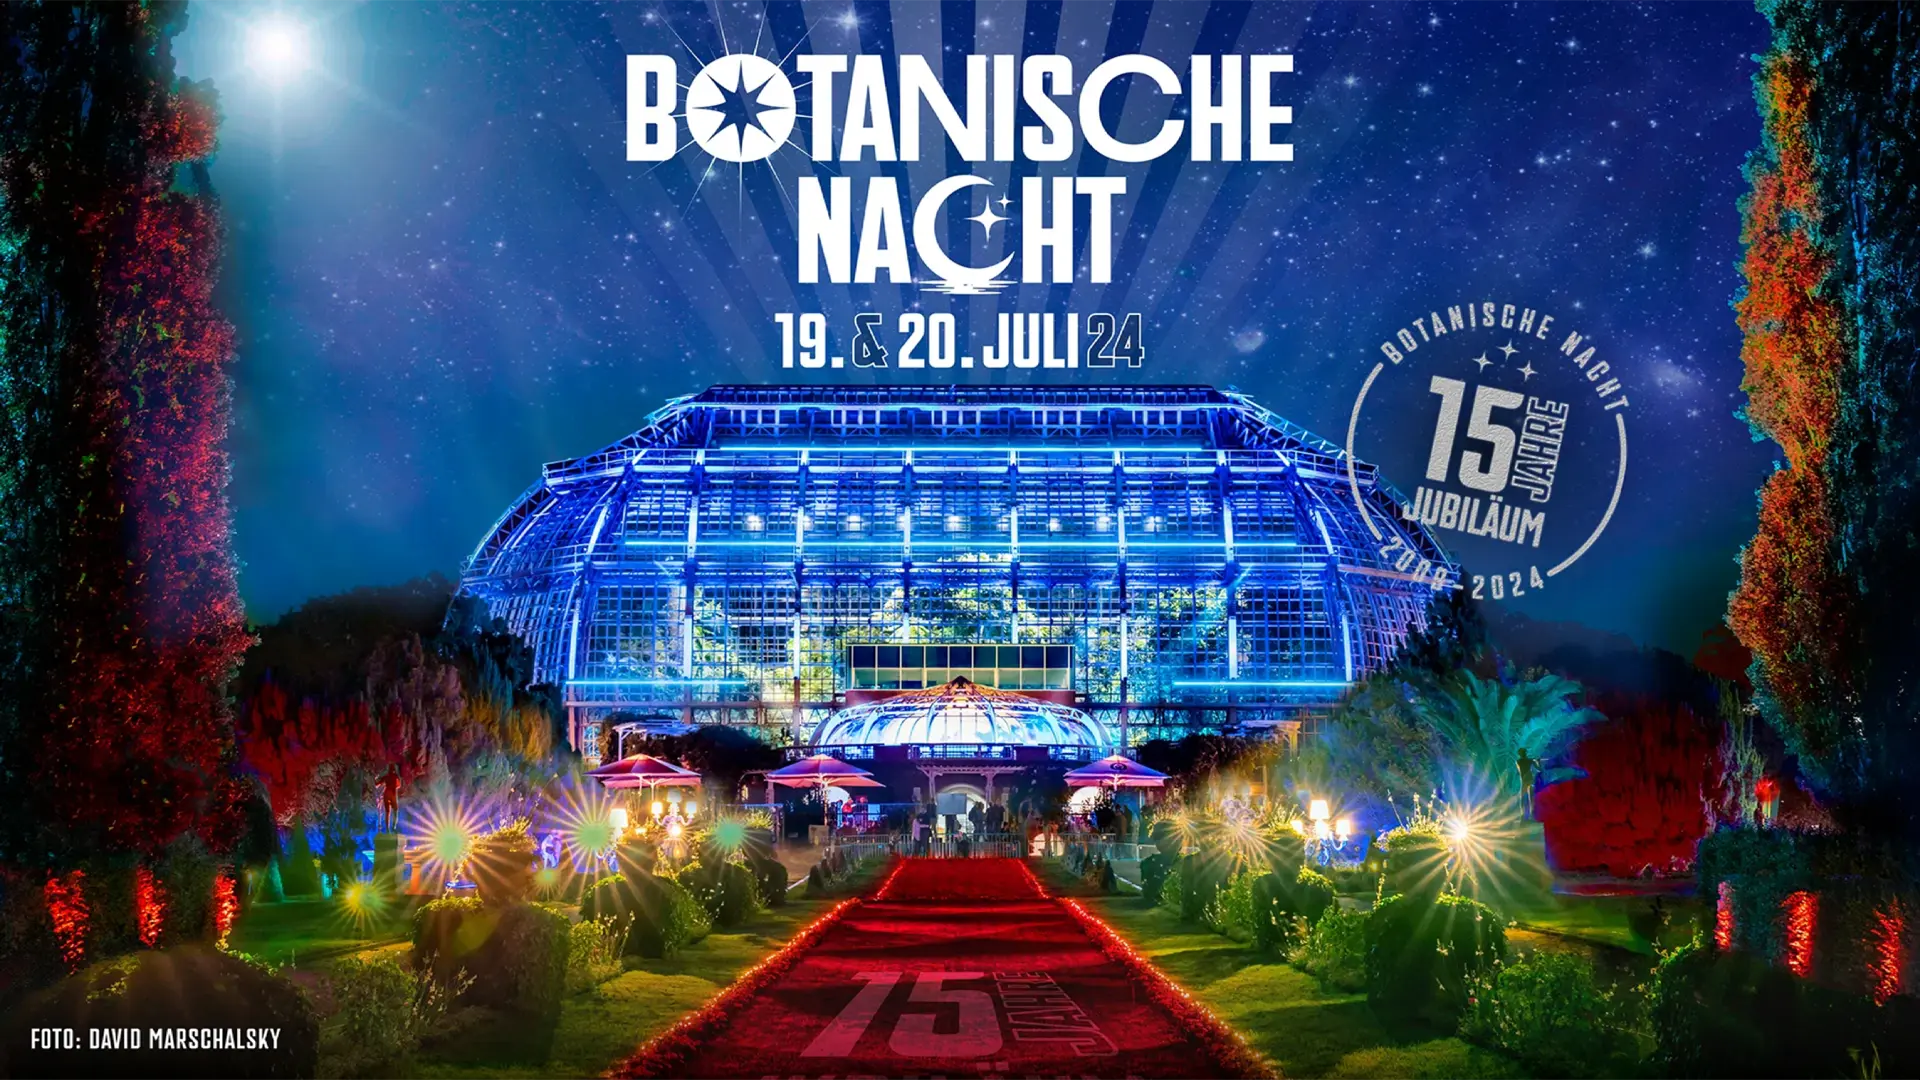 One picture shows the main motif with the lettering "15th anniversary" of the Botanical Night in the Berlin Botanical Garden.